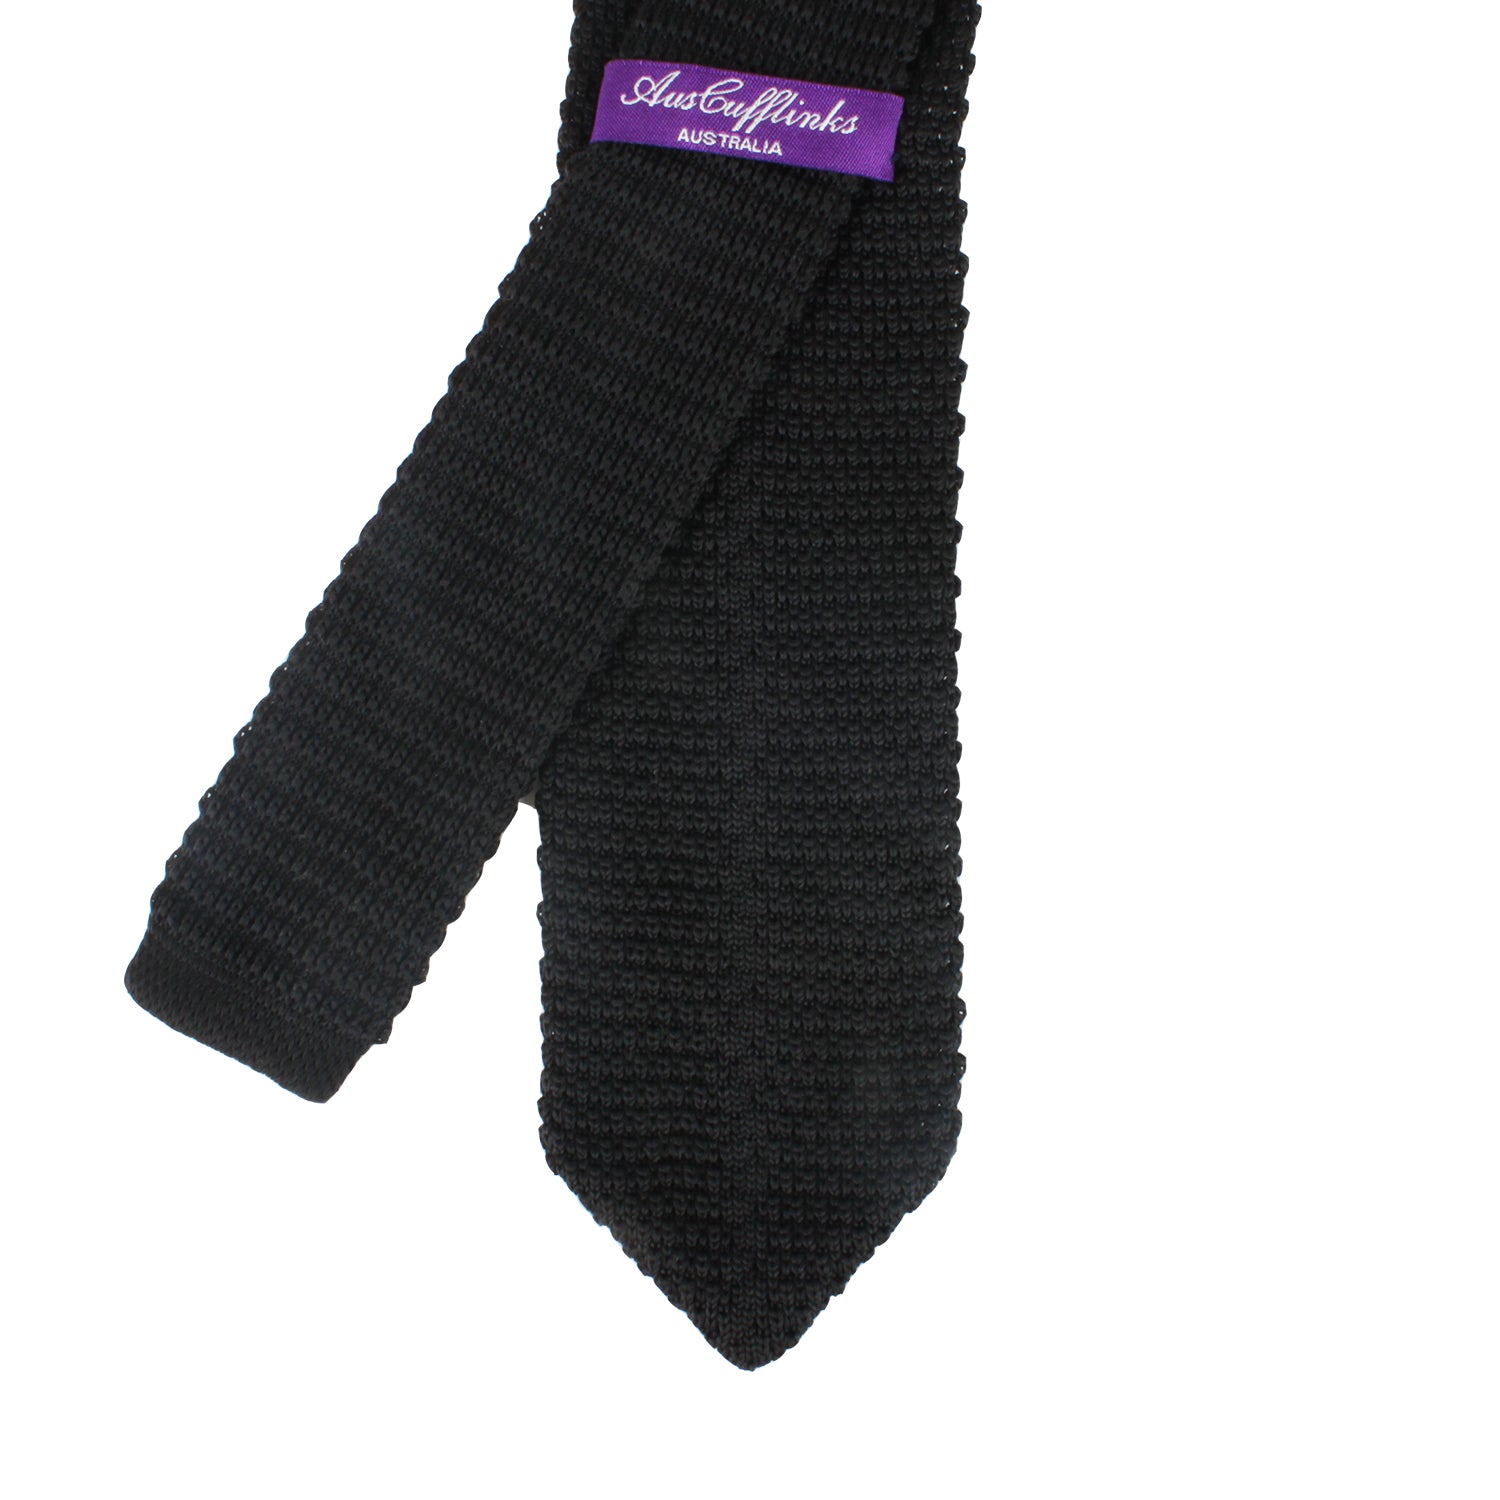 A classic Black Knitted Skinny Tie on a white background.